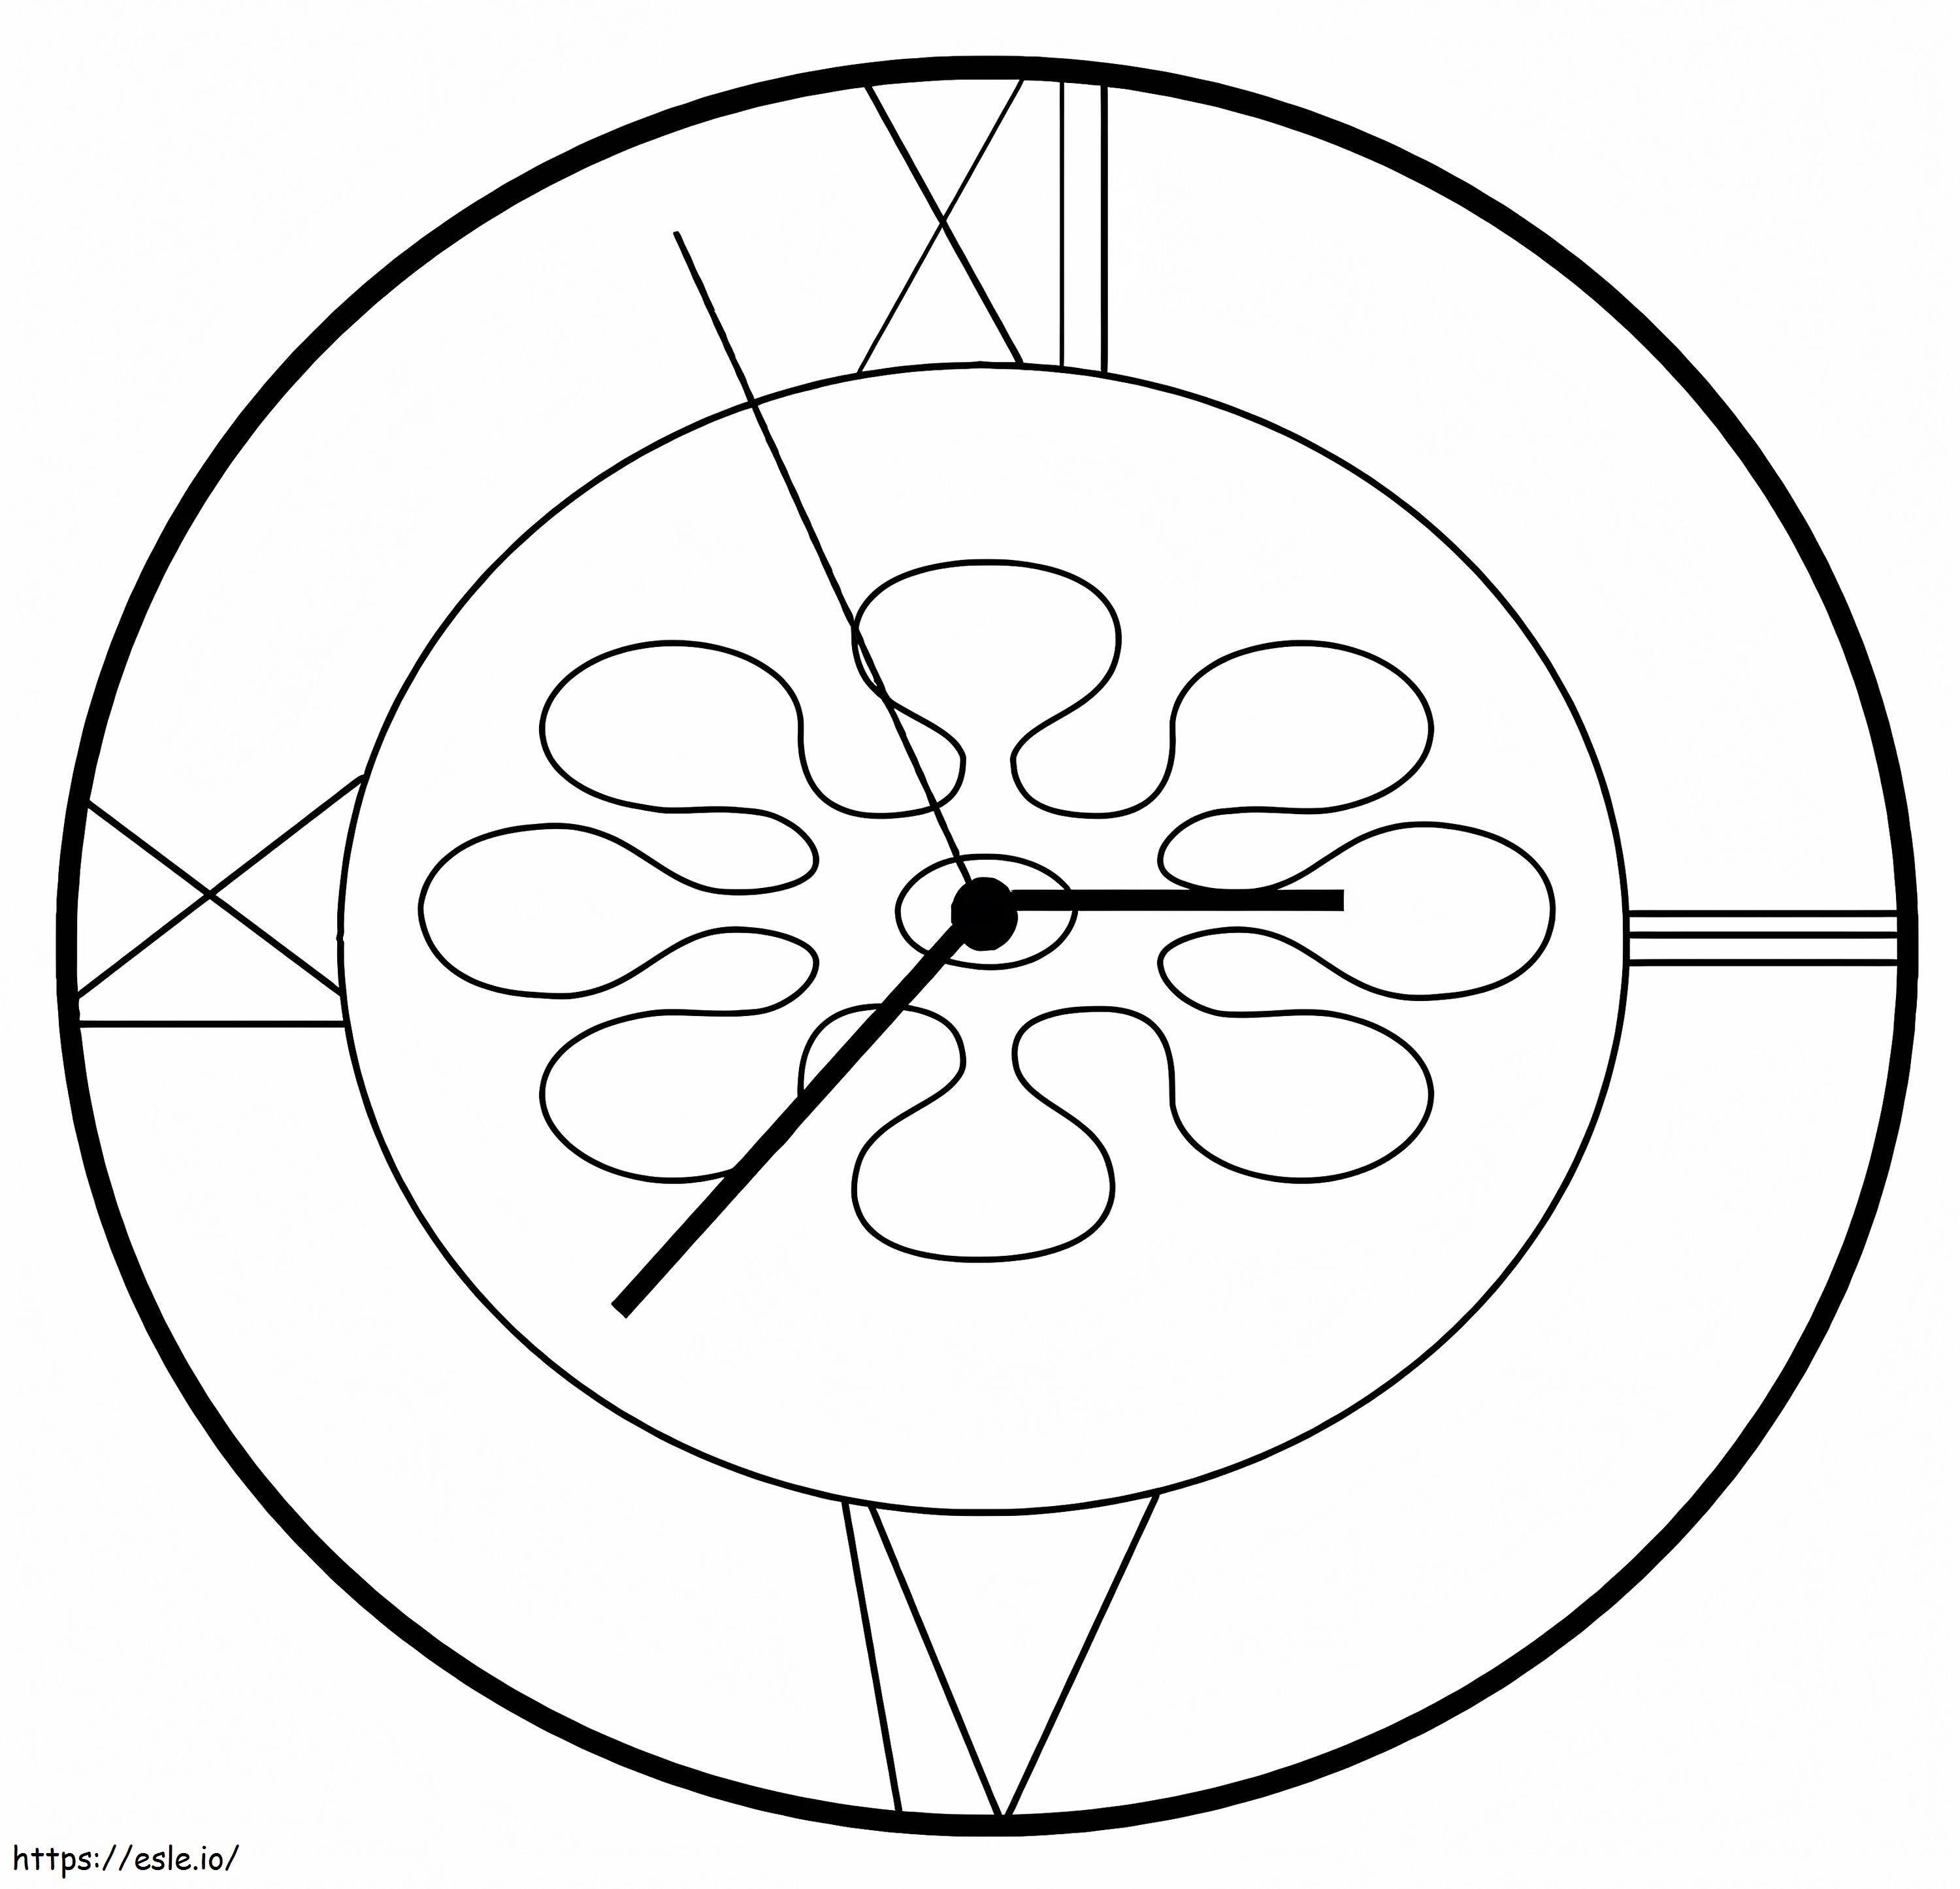 Clock 3 coloring page